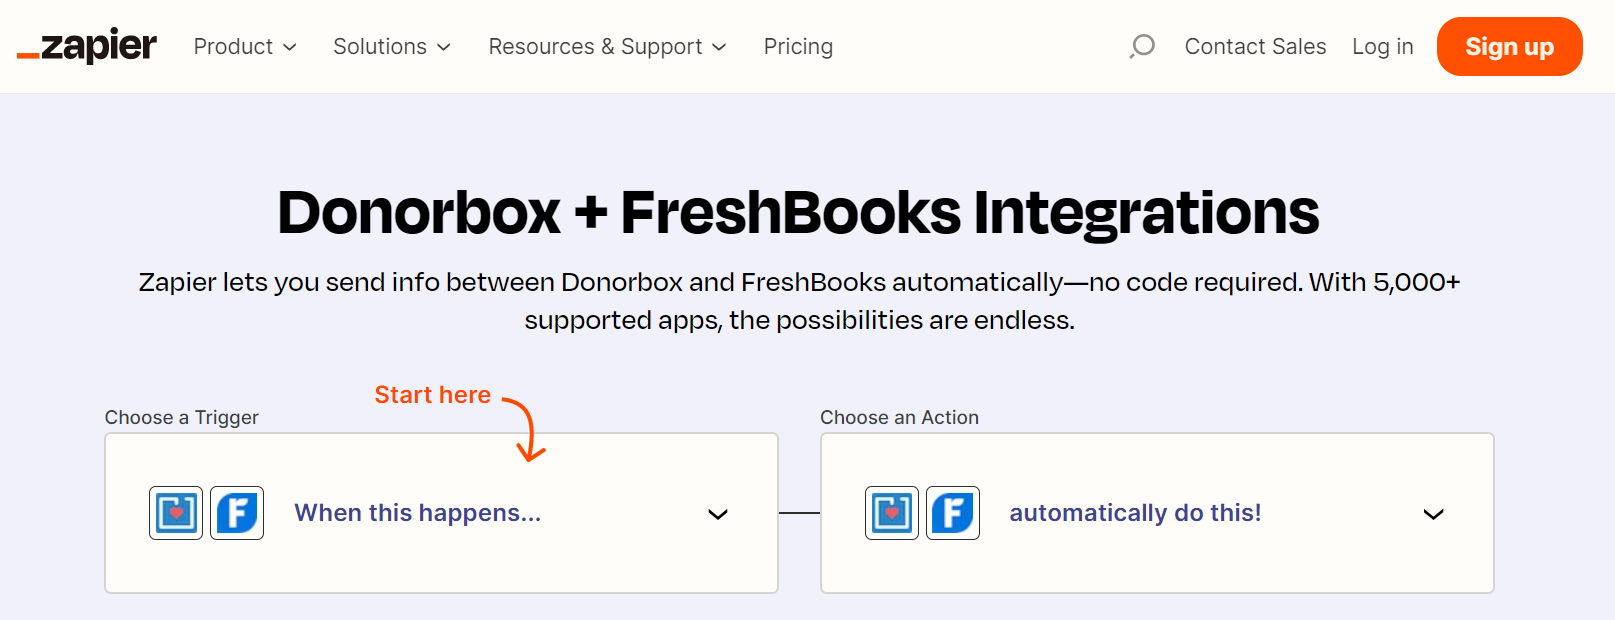 donorbox and freshbooks integration